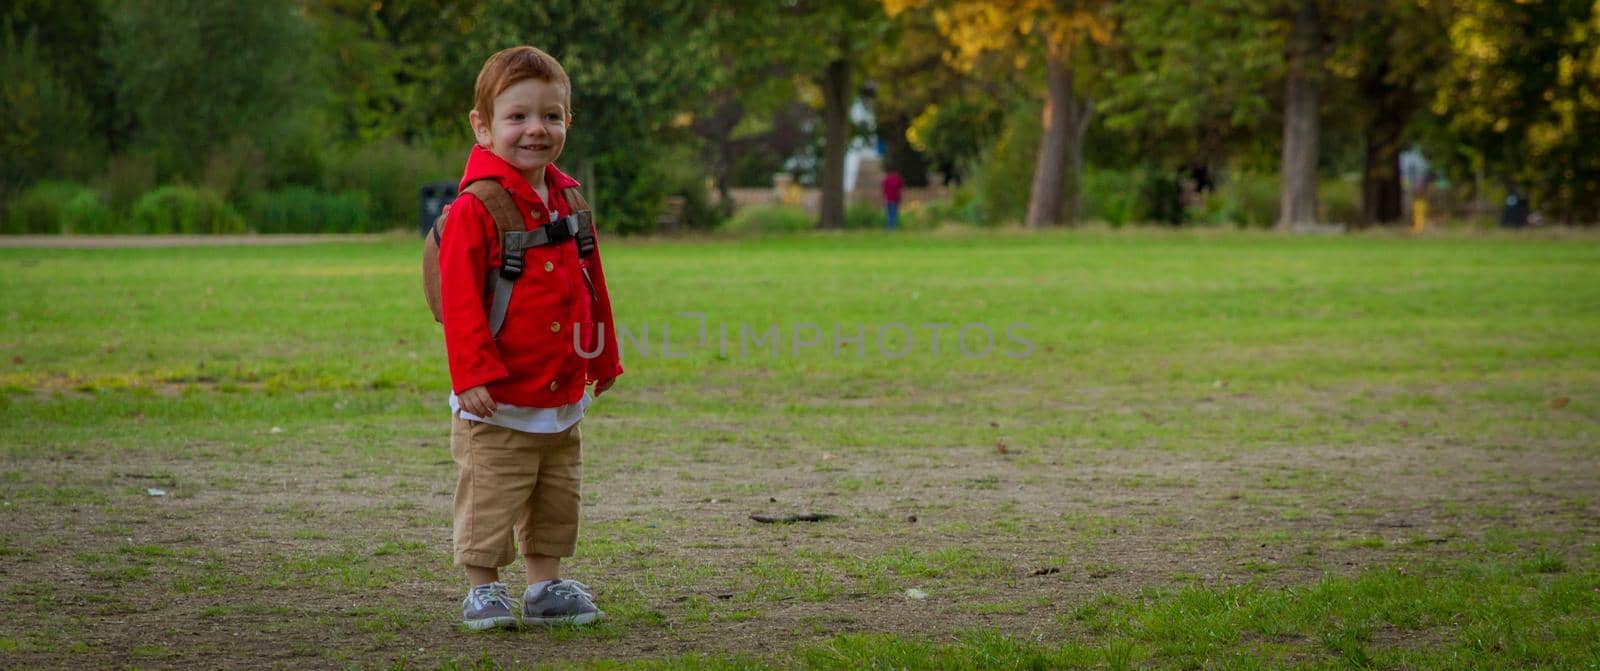 Cute Baby Boy Standing in a Park on a Sunny Evening by AlbertoPascual